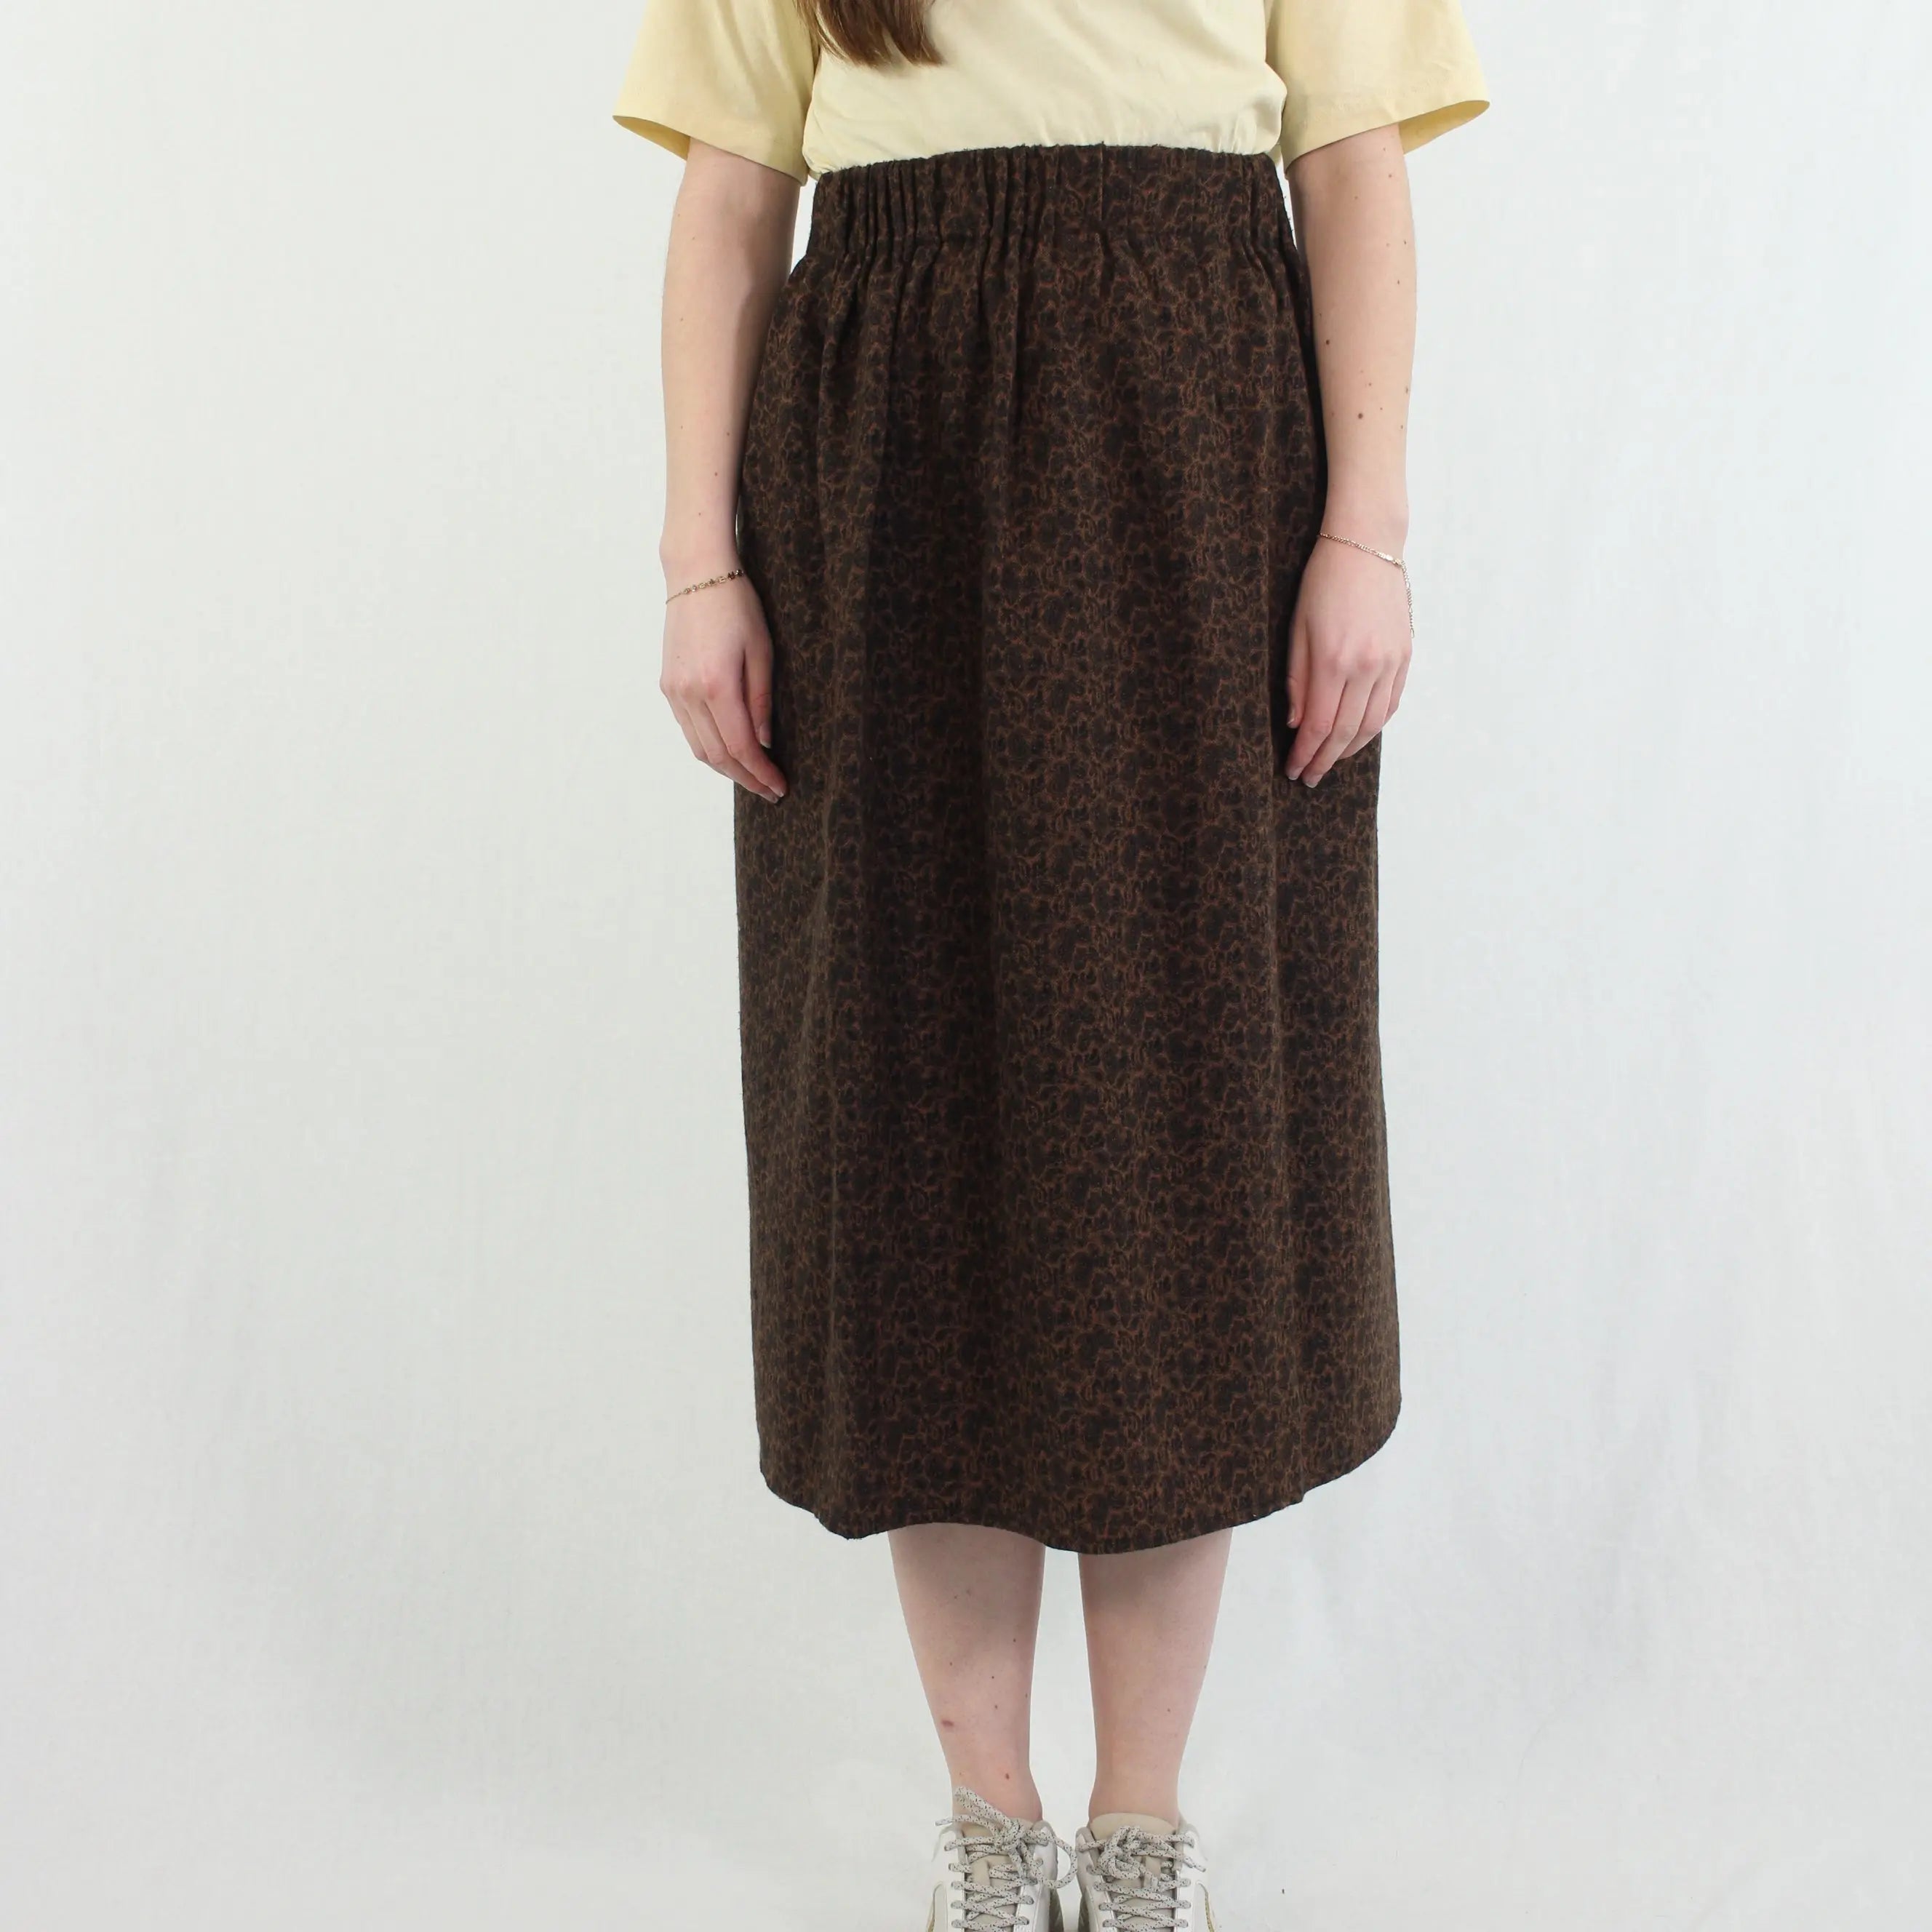 Paquito - Brown Wool Skirt- ThriftTale.com - Vintage and second handclothing